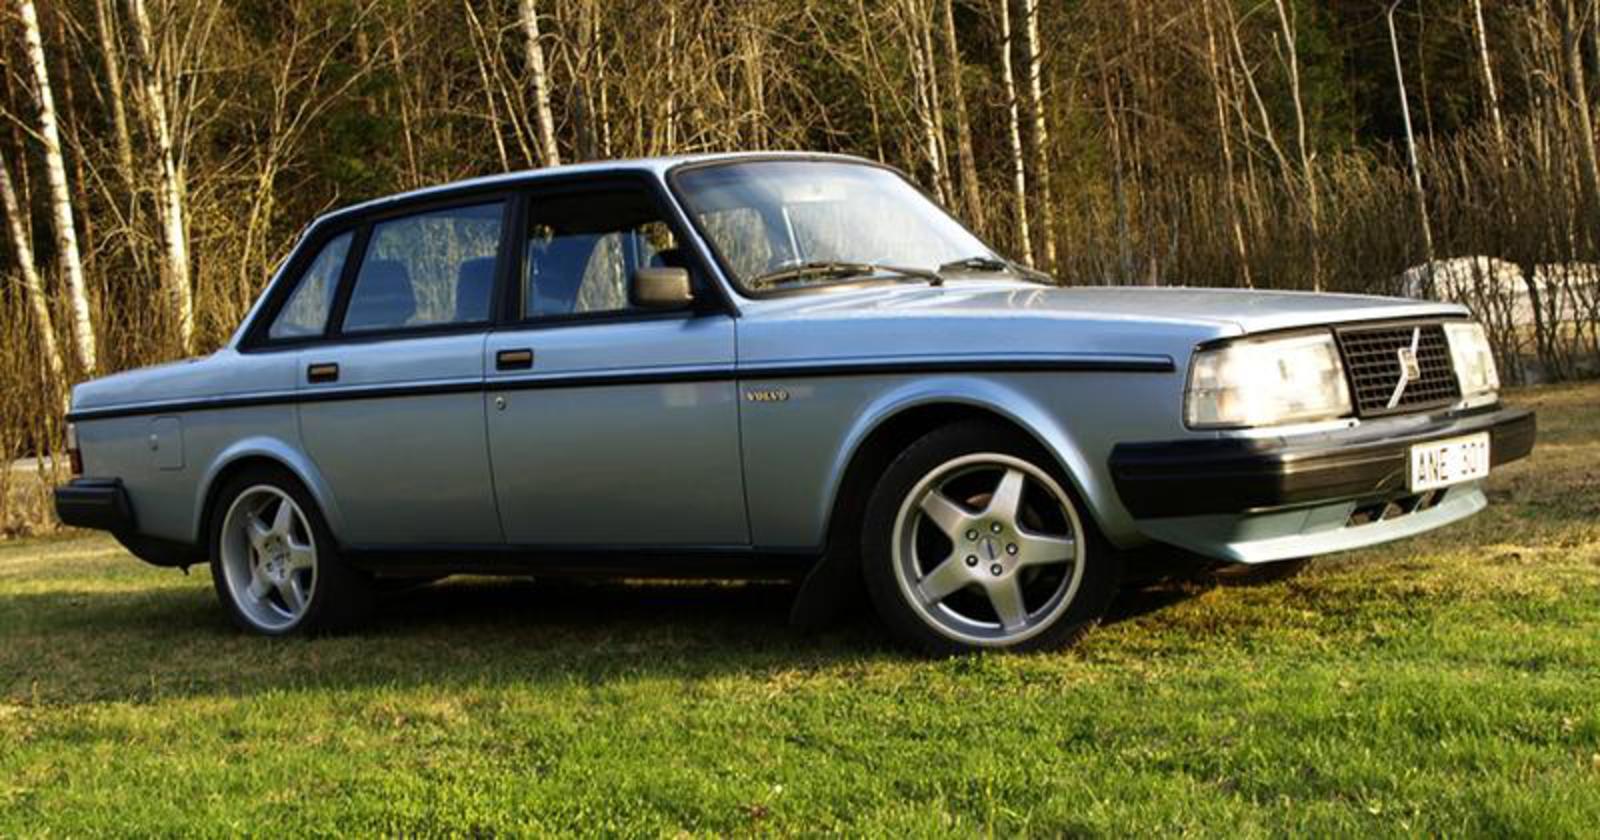 Volvo 244GLT Turbo. View Download Wallpaper. 800x420. Comments